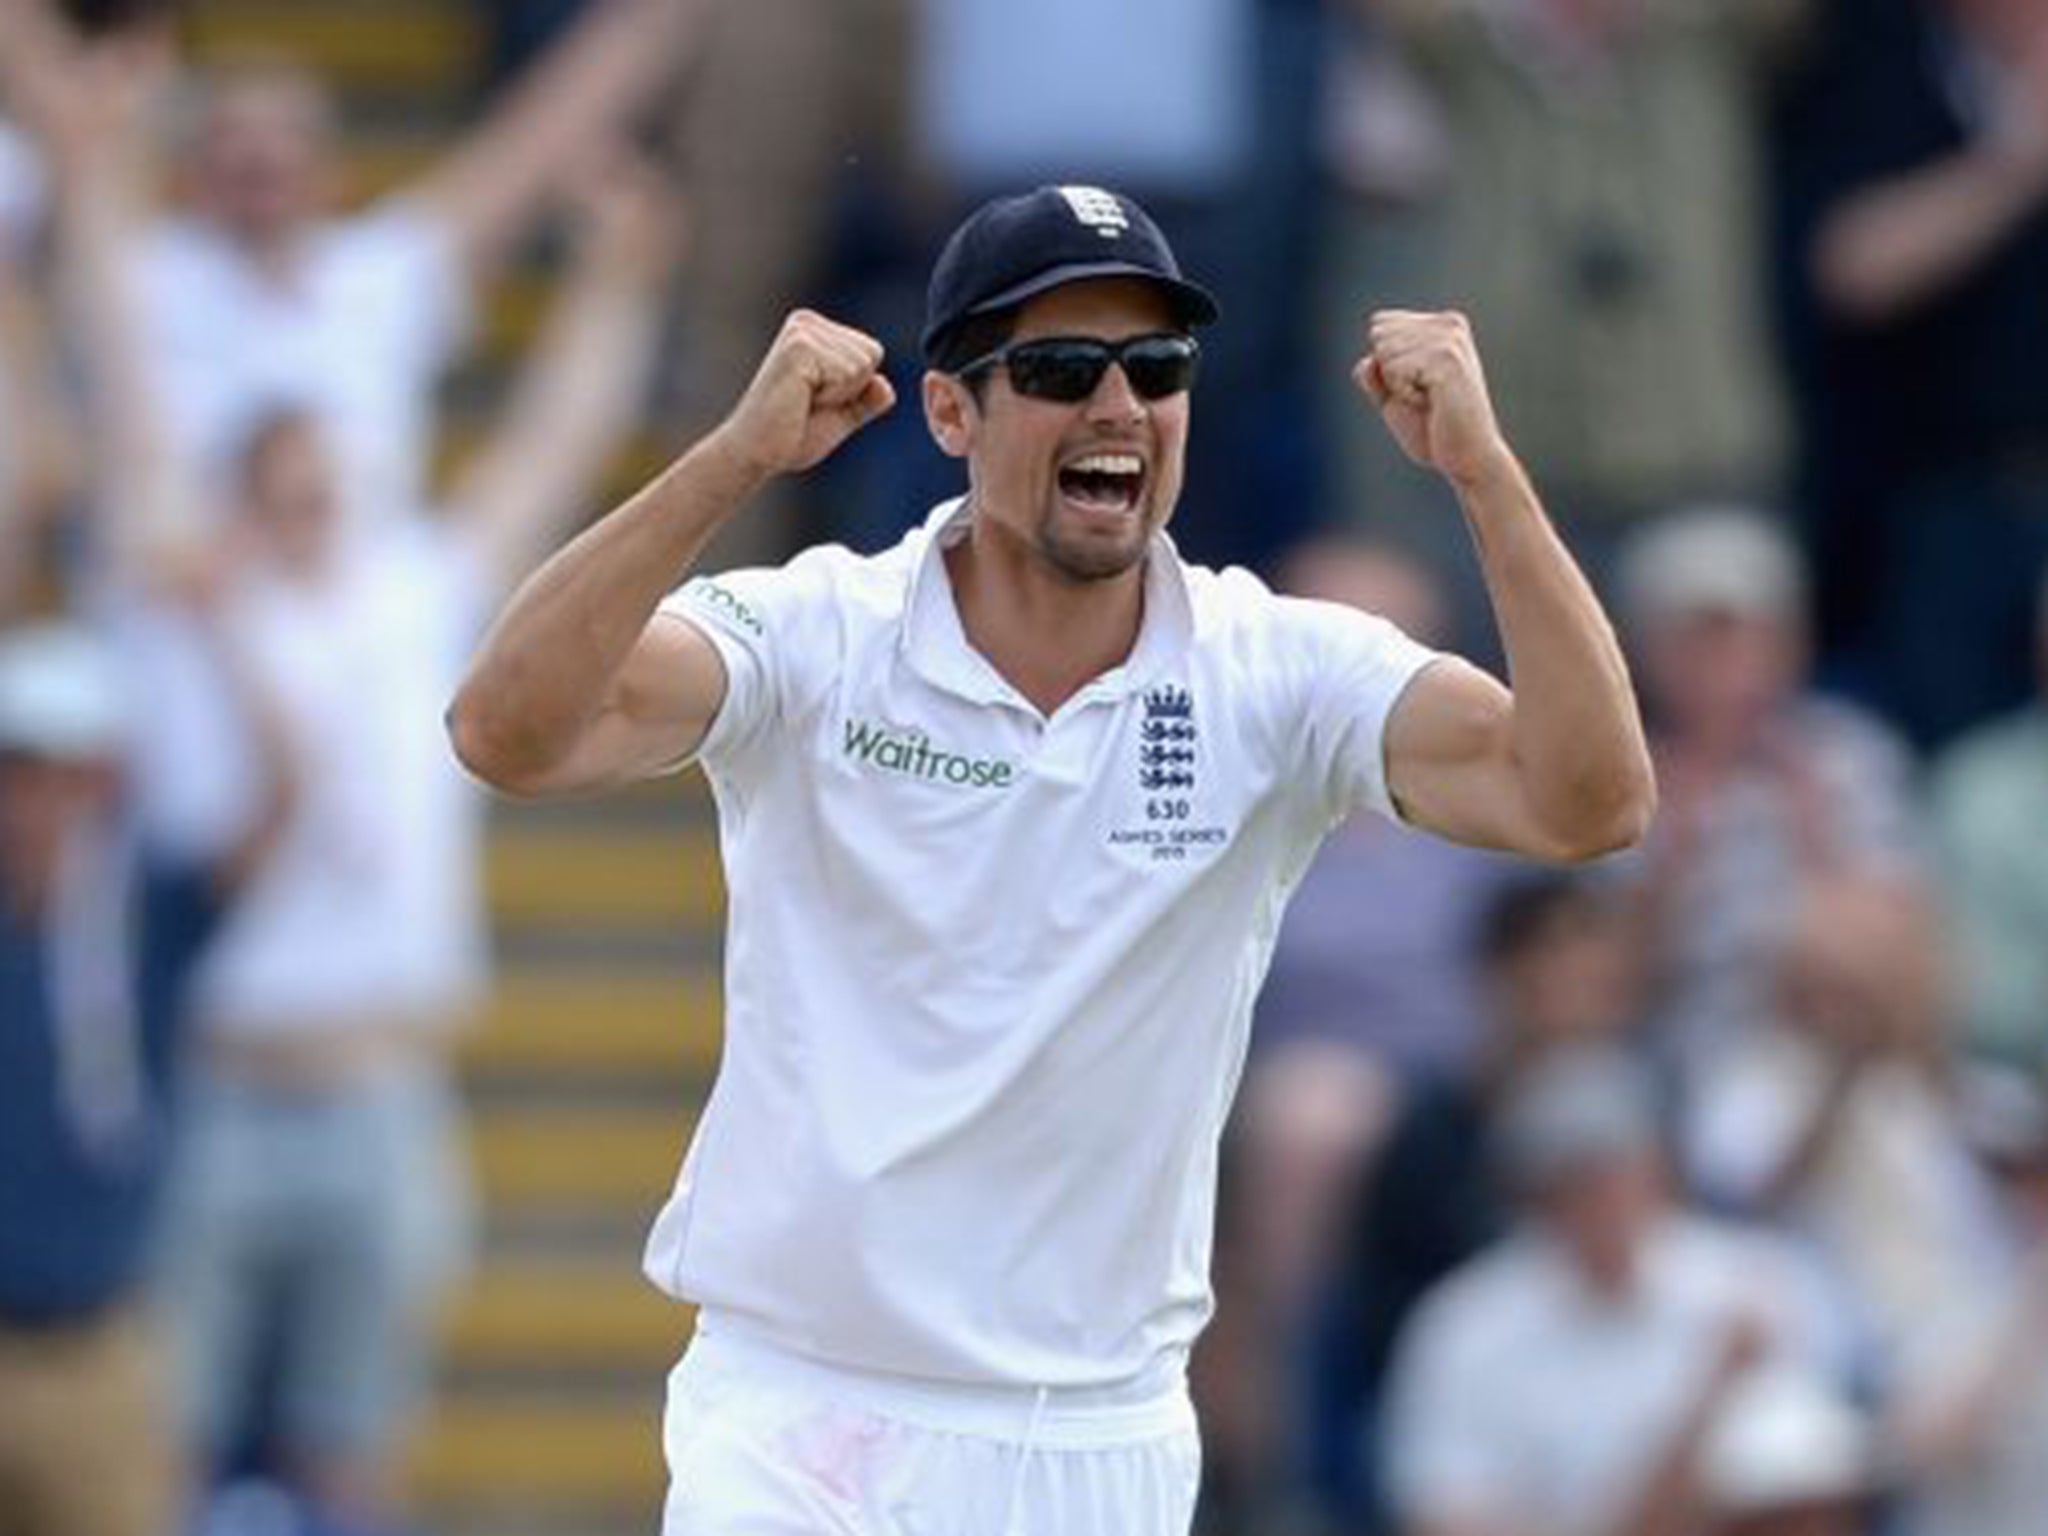 England captain Alastair Cook believes the win in Cardiff shows that his side can beat Australia without needing to compromise on their style